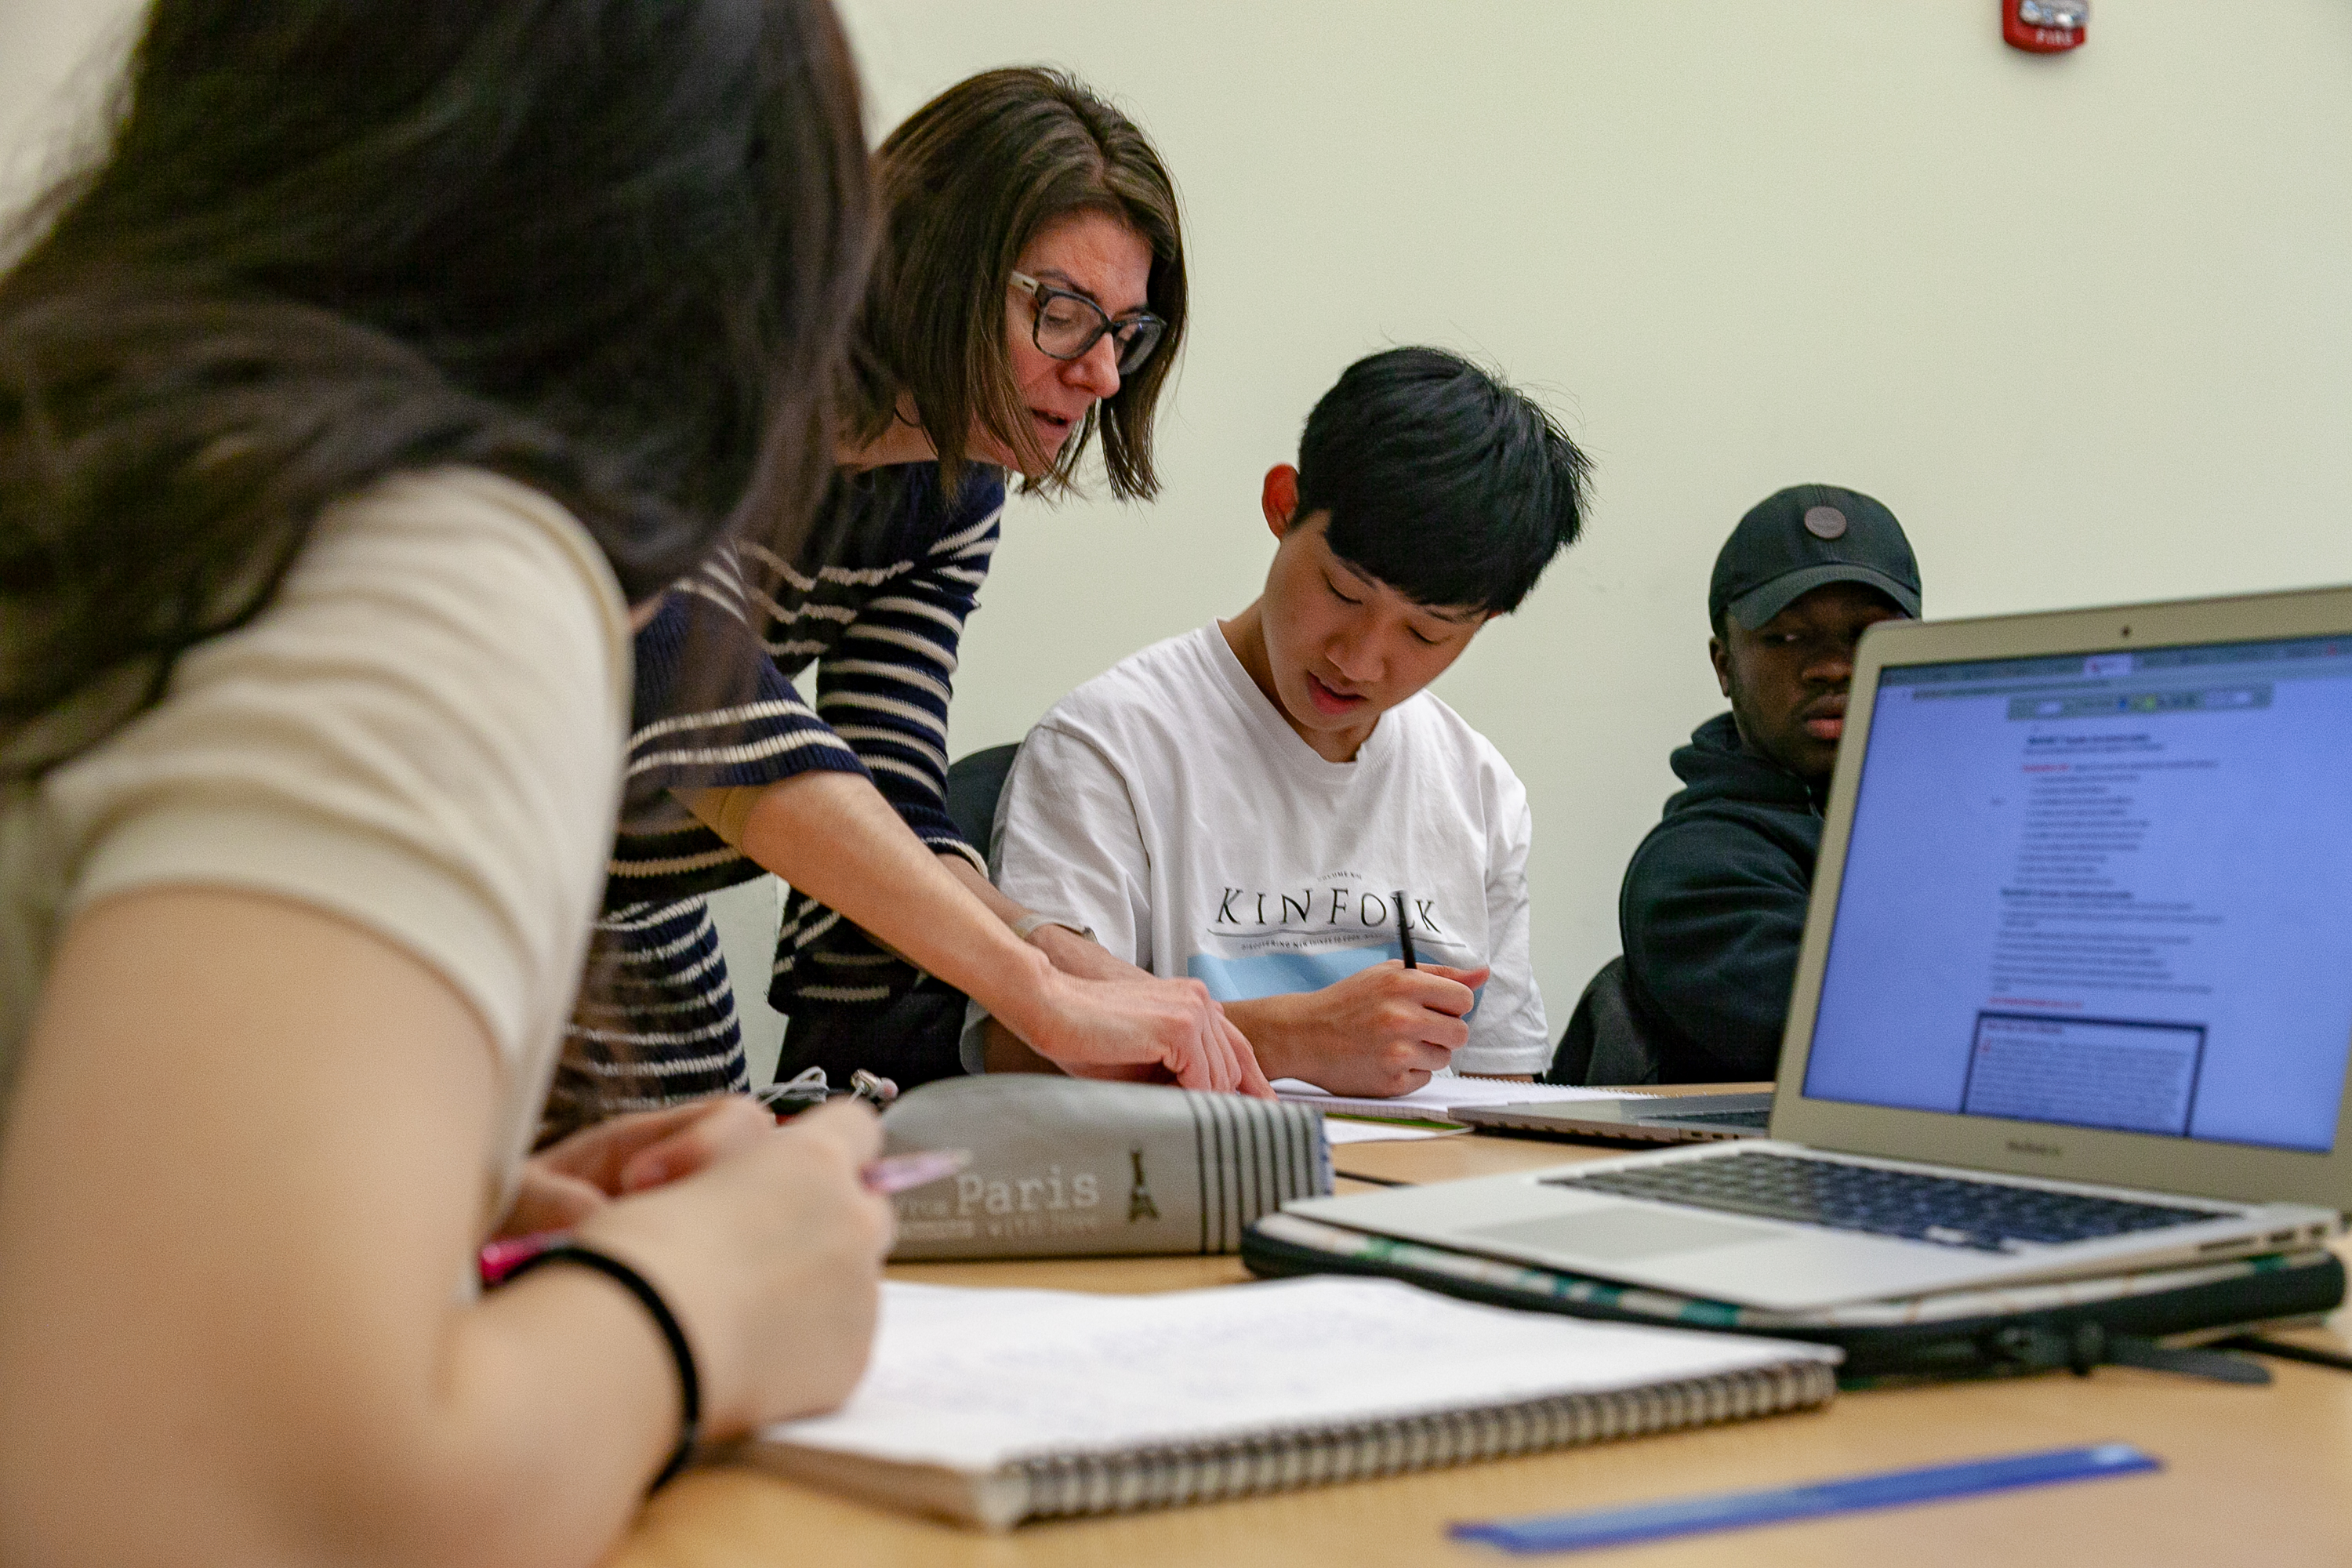 Students and faculty completing research on a computer